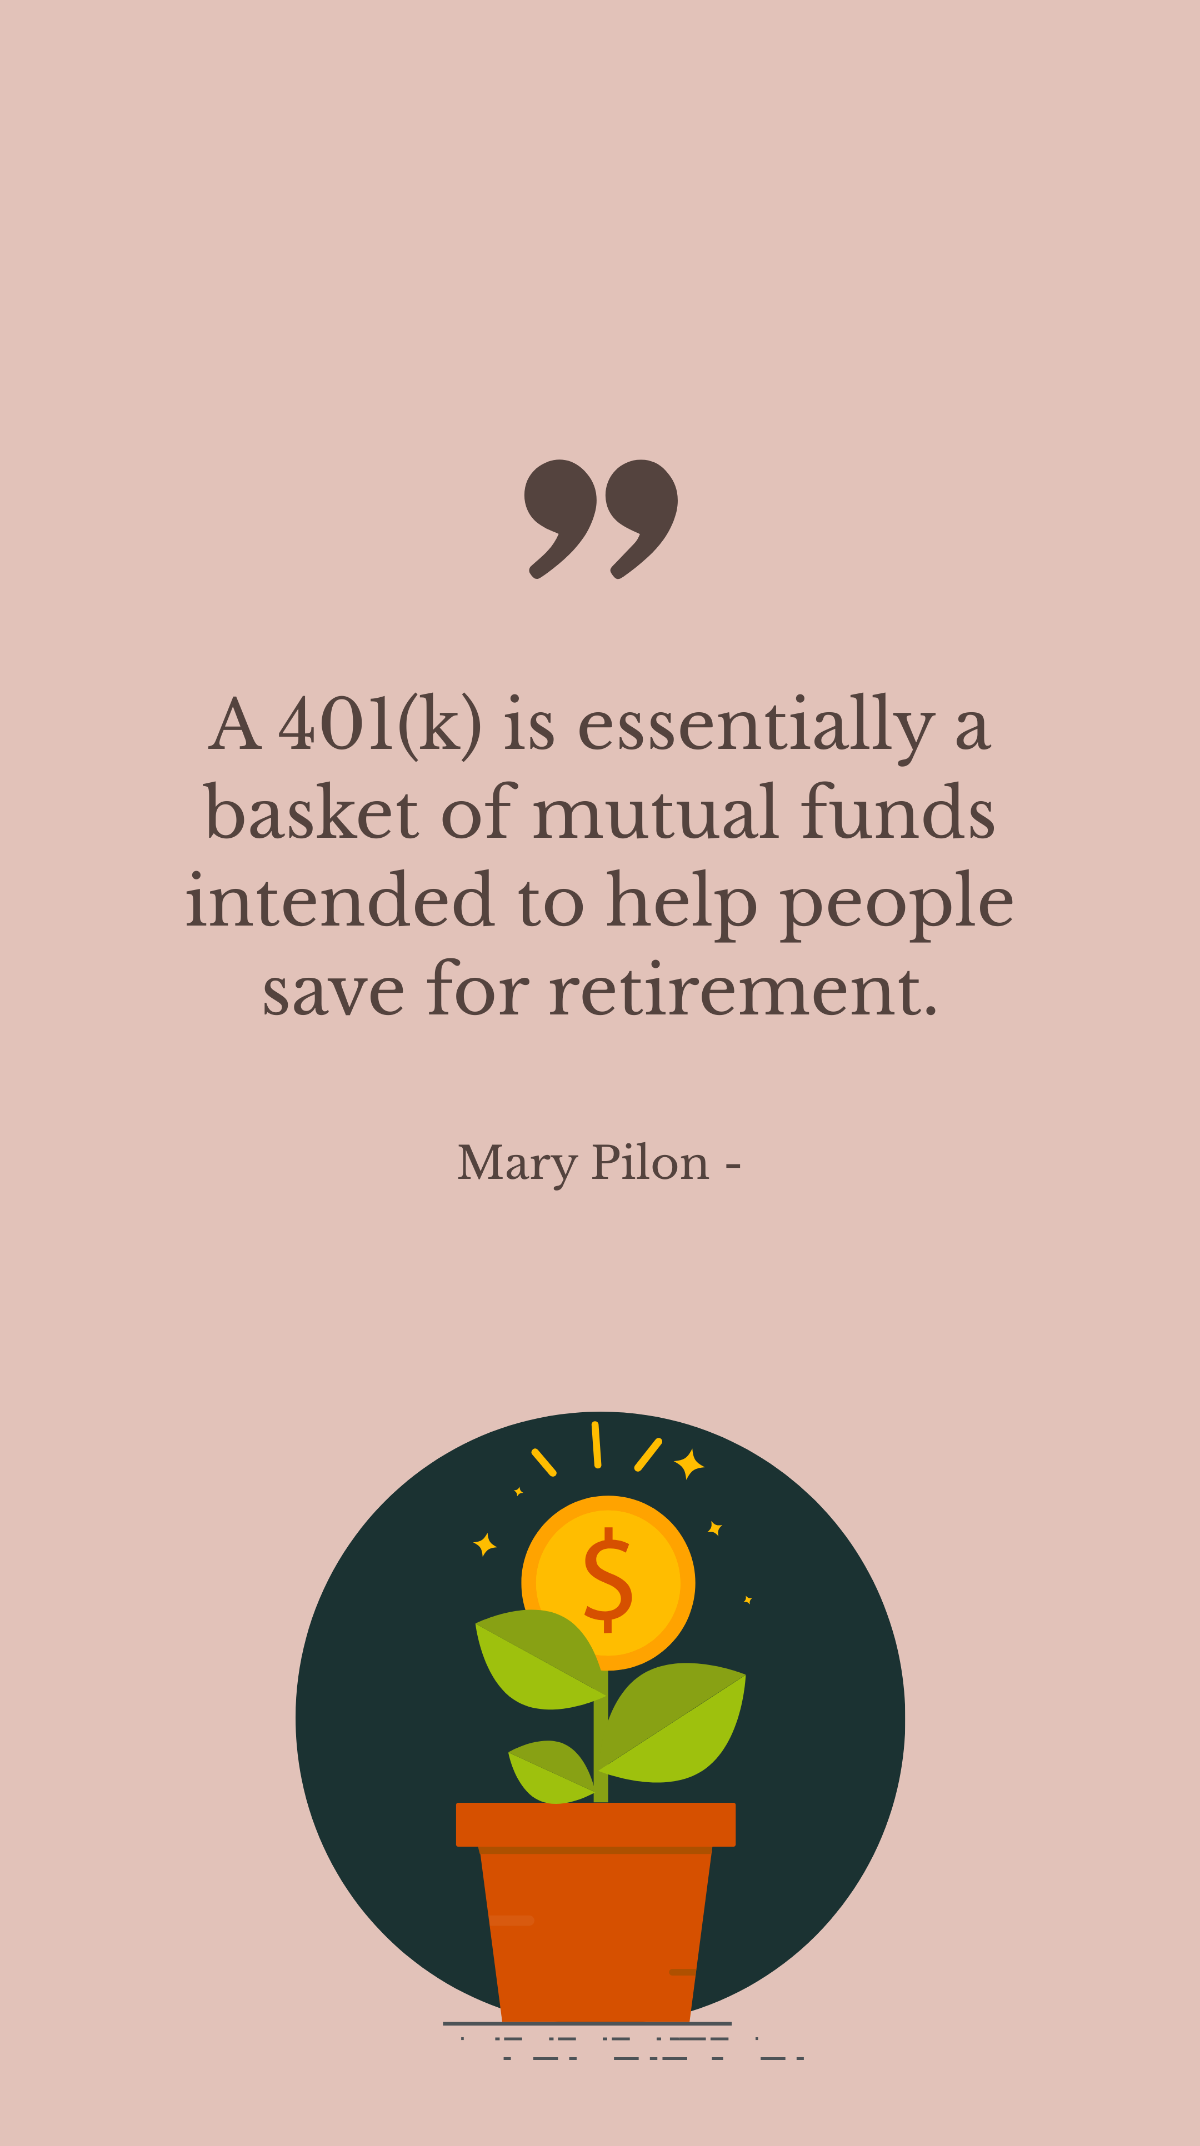 Free Mary Pilon - A 401(k) is essentially a basket of mutual funds intended to help people save for retirement. Template